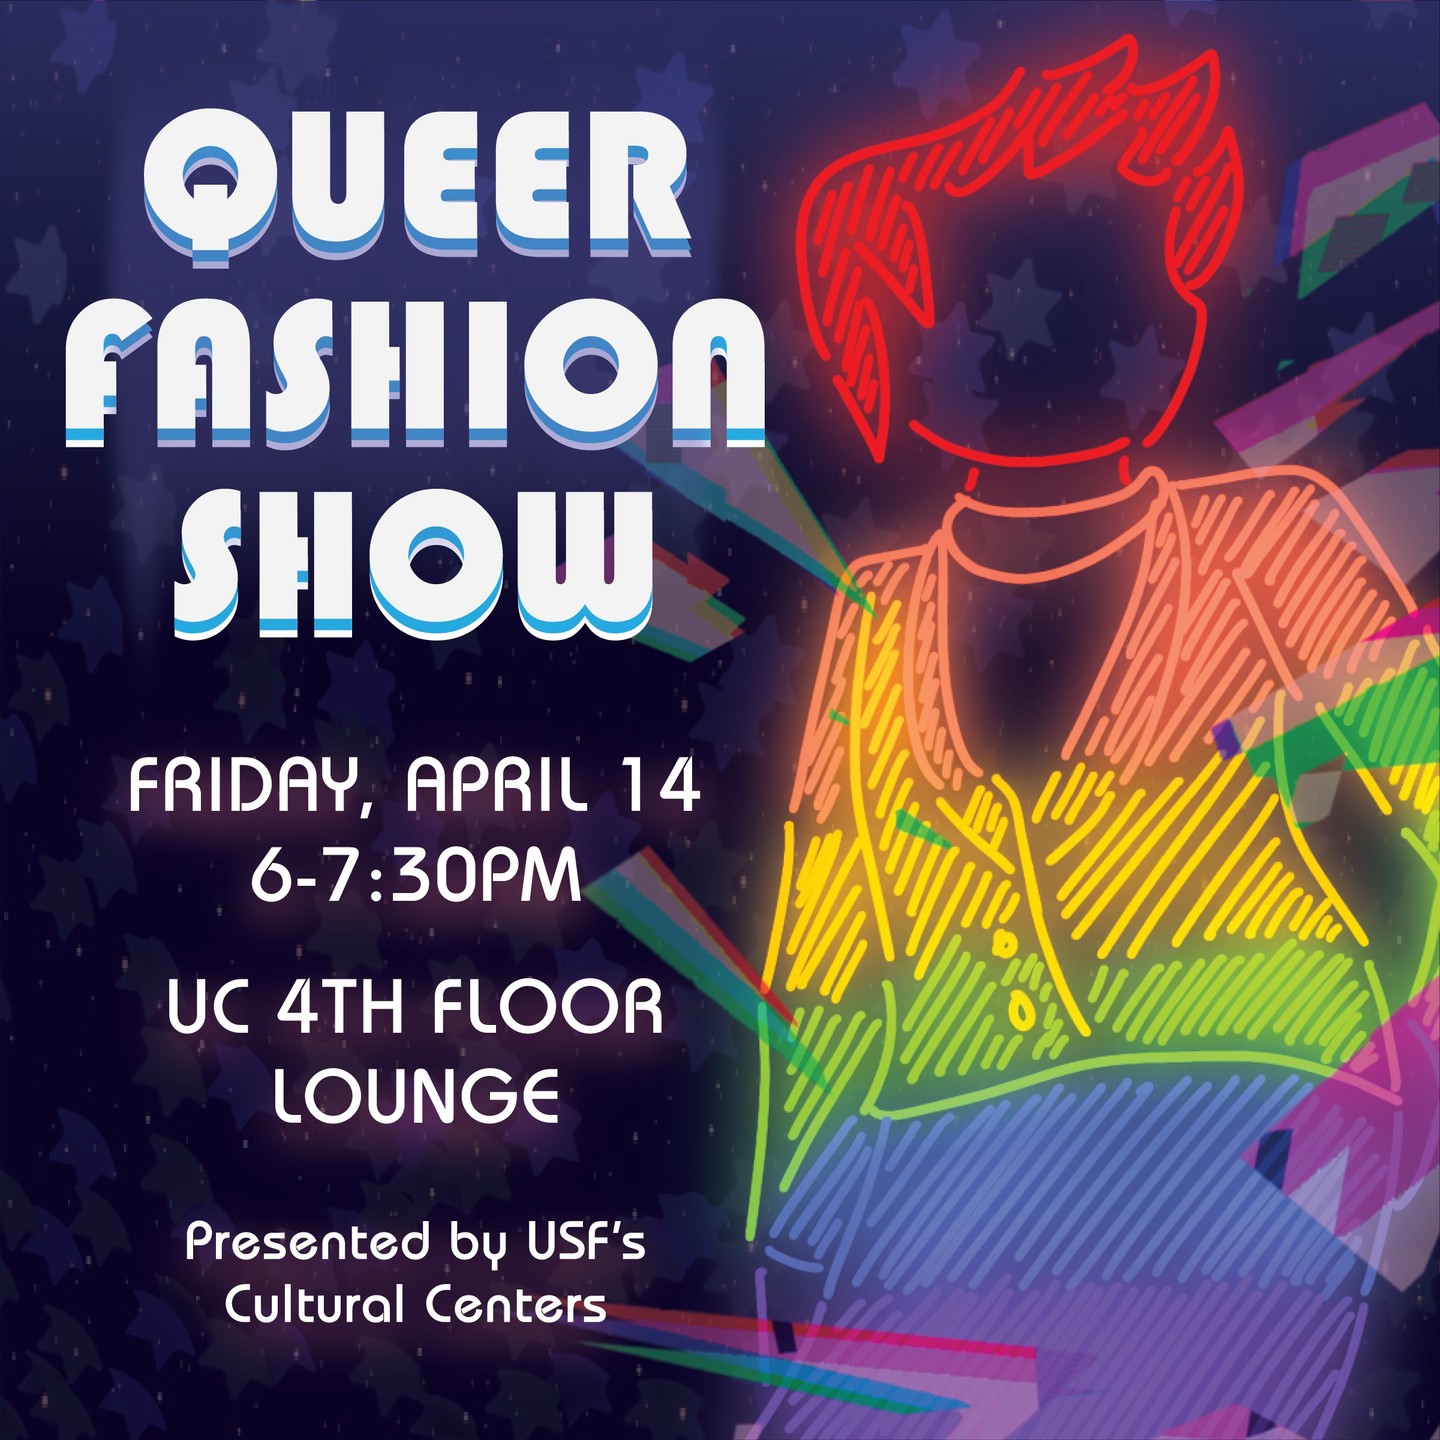 A person drawn in neon rainbow colors poses in a unique outfit. Queer Fashion Show. Friday April 14 6:00-7:30PM in the UC 4th Floor Lounge, presented by the USF Cultural Centers.